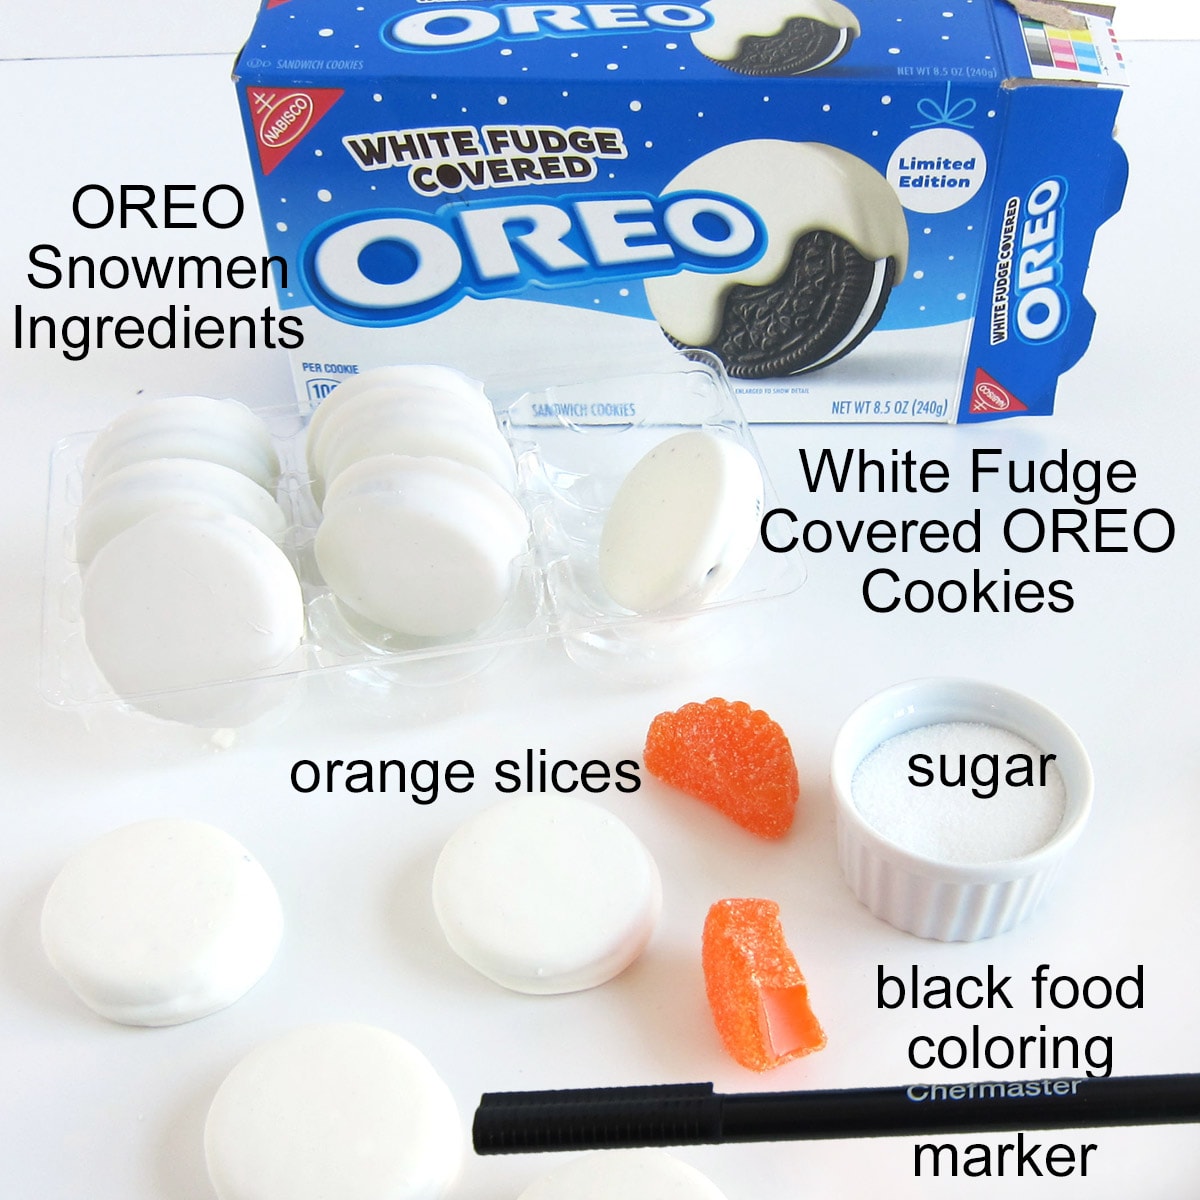 OREO Snowmen ingredients including white fudge covered OREOs, orange slices, and a black food coloring marker. 